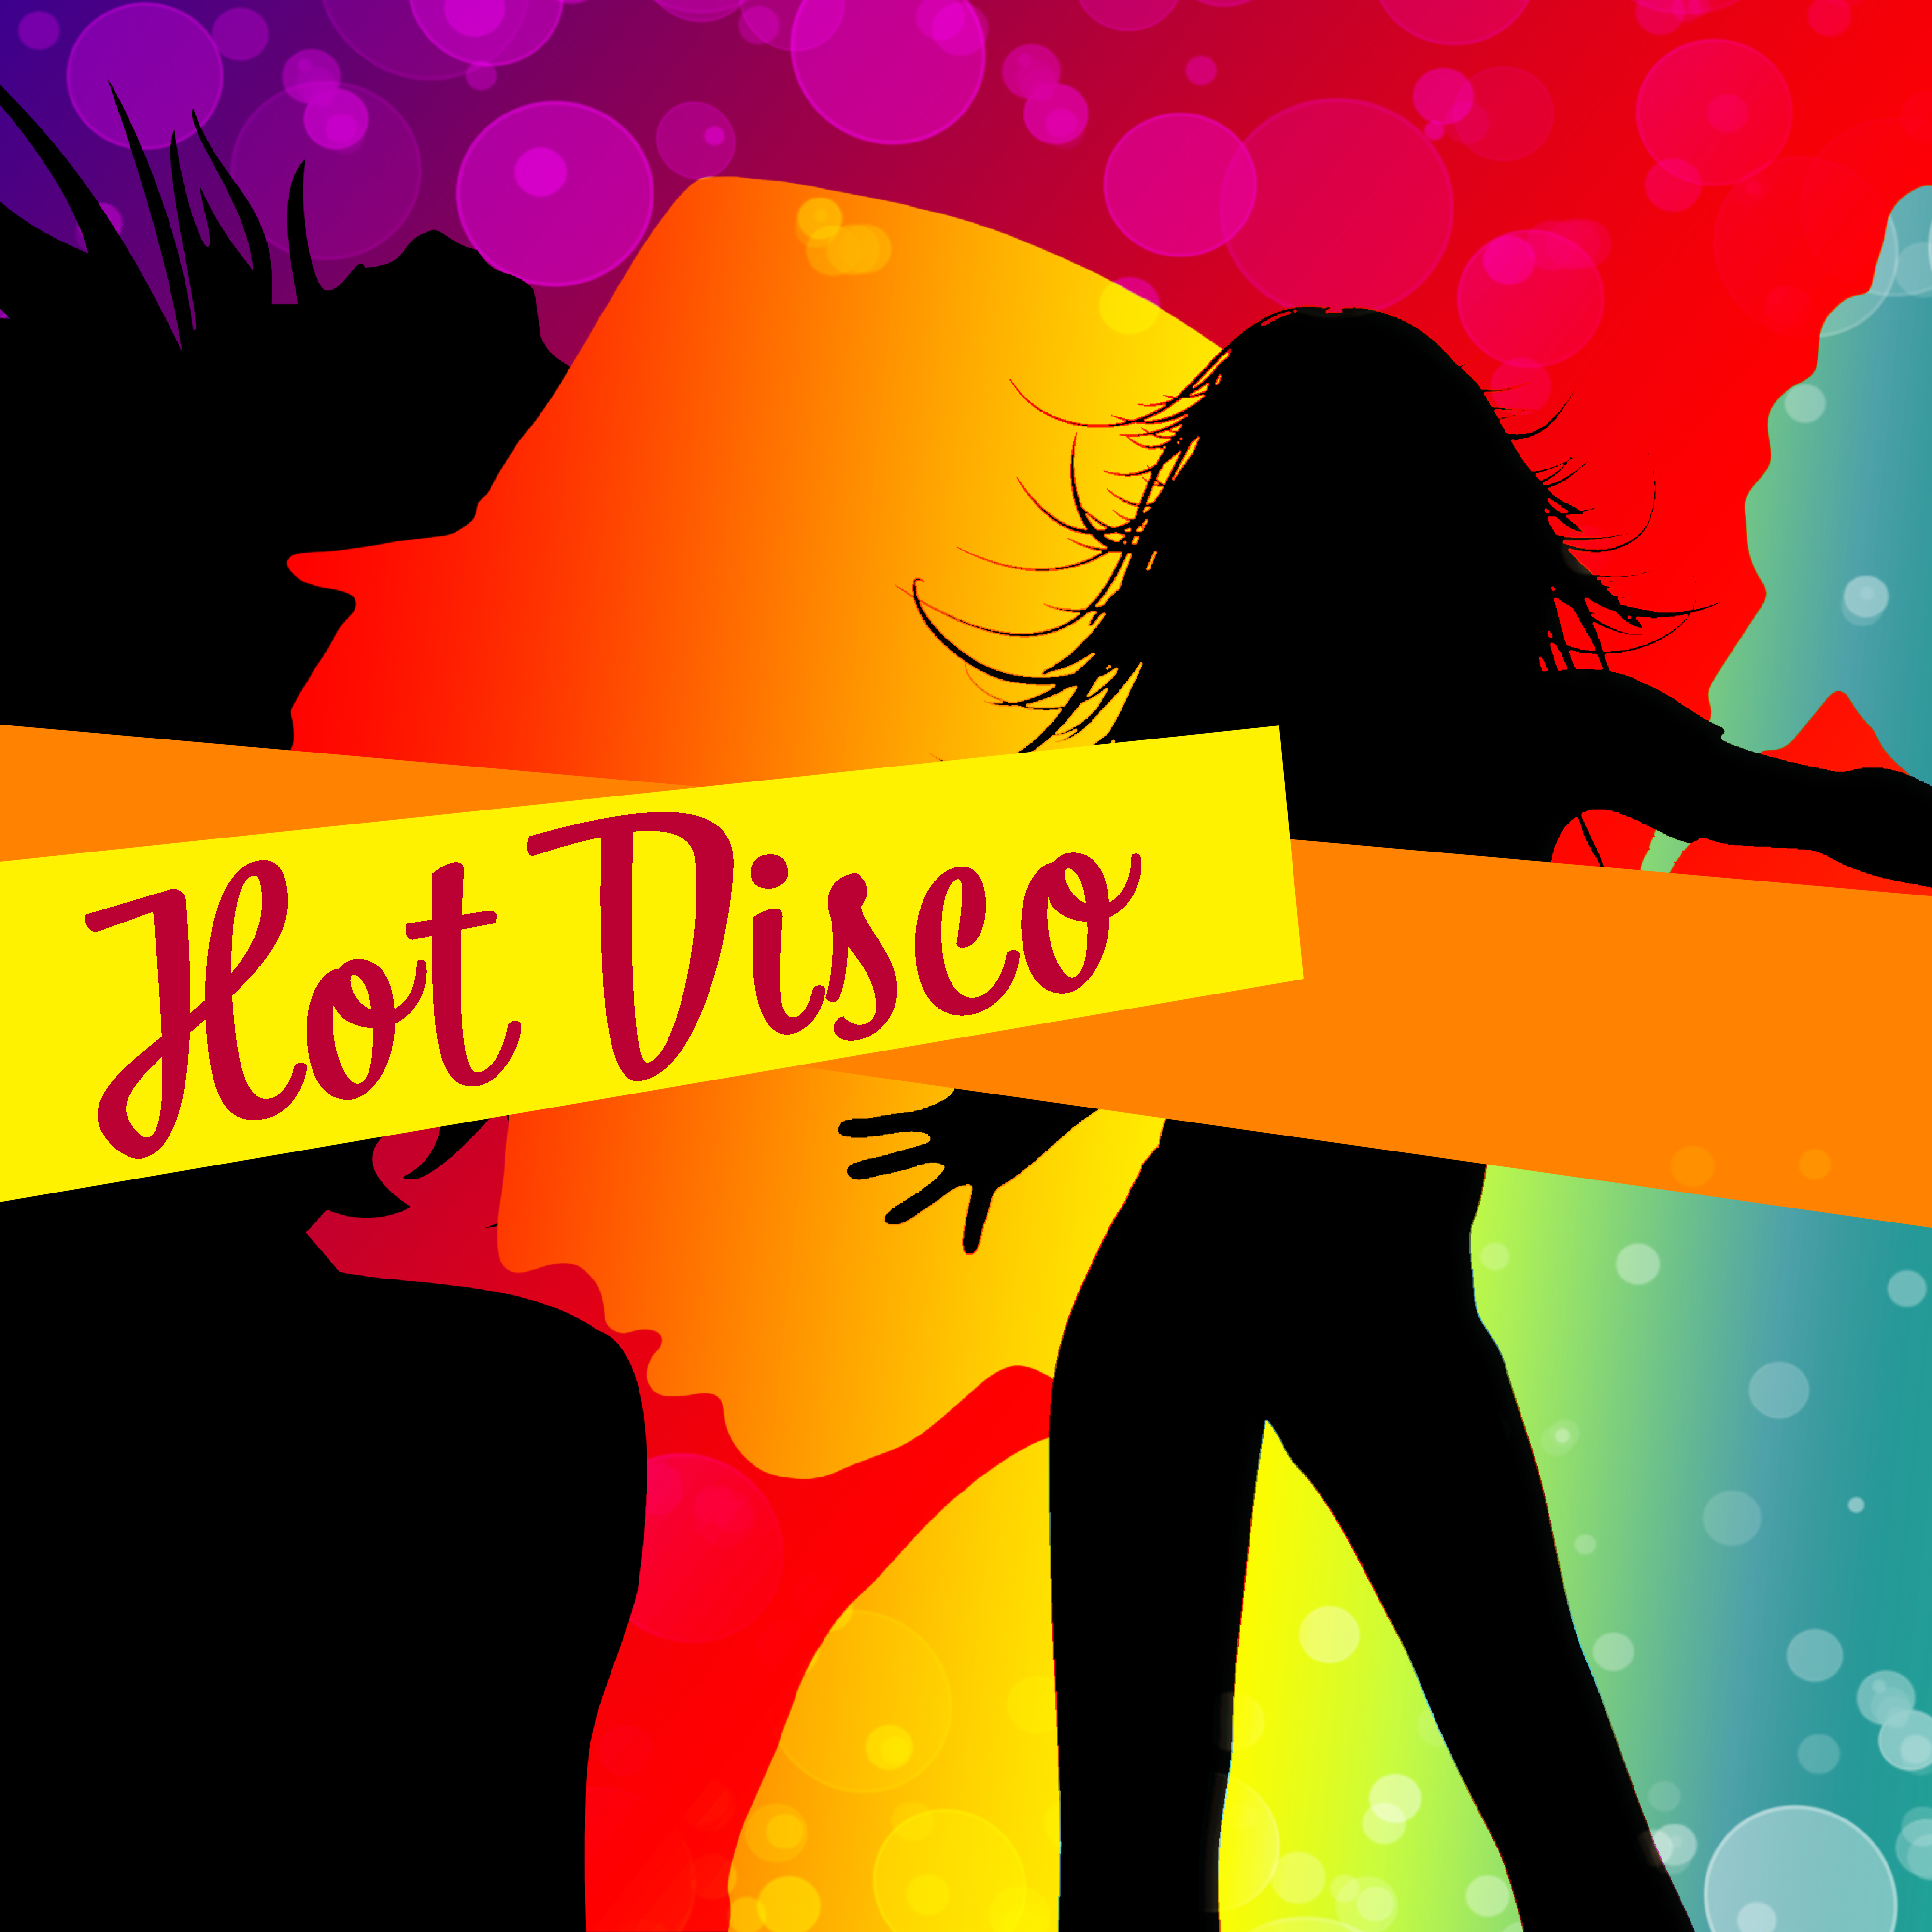 Hot Disco  Ibiza Dance Party, Summertime, Sensual Dance,  Vibes, Tropical Lounge Music, Relax, Party Night